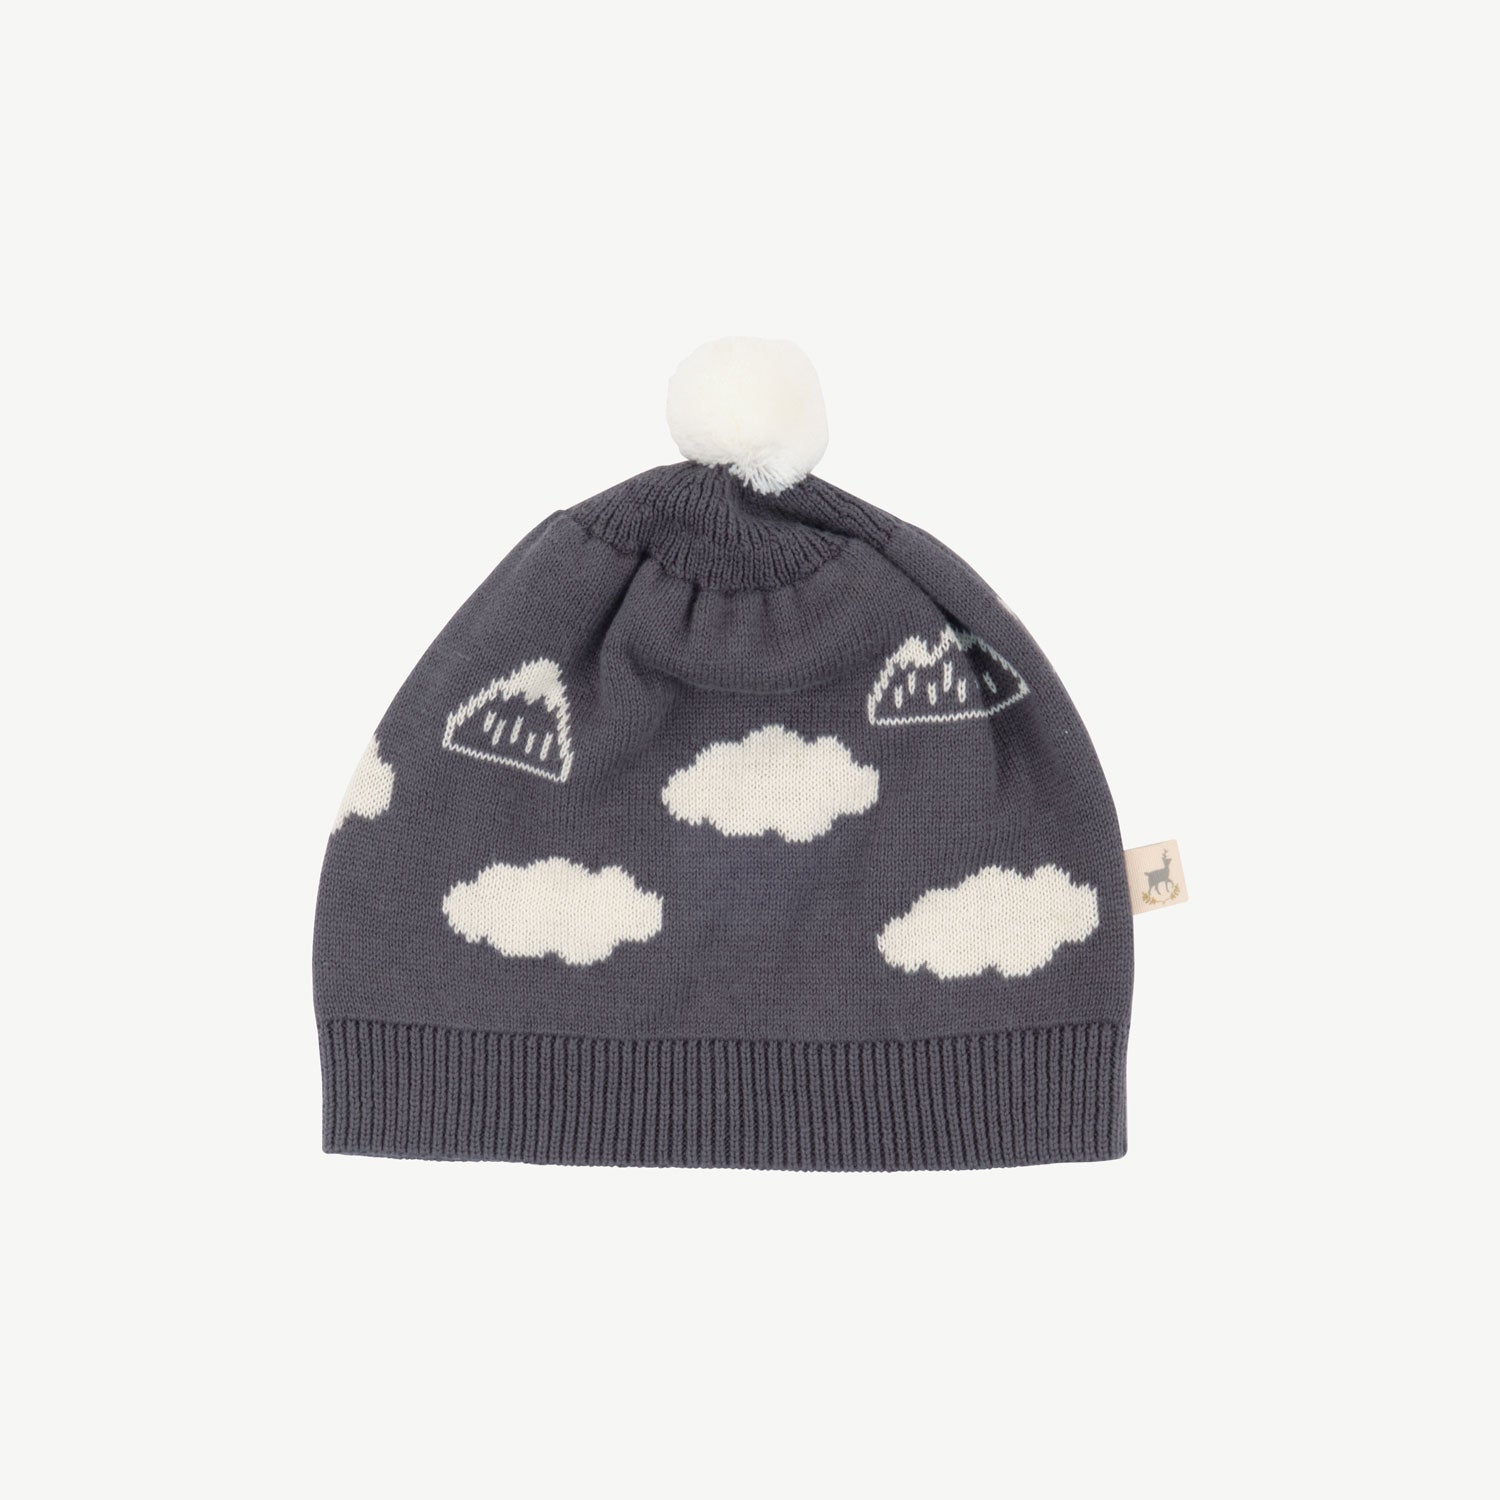 'mountain's view' charcoal gray knit beanie